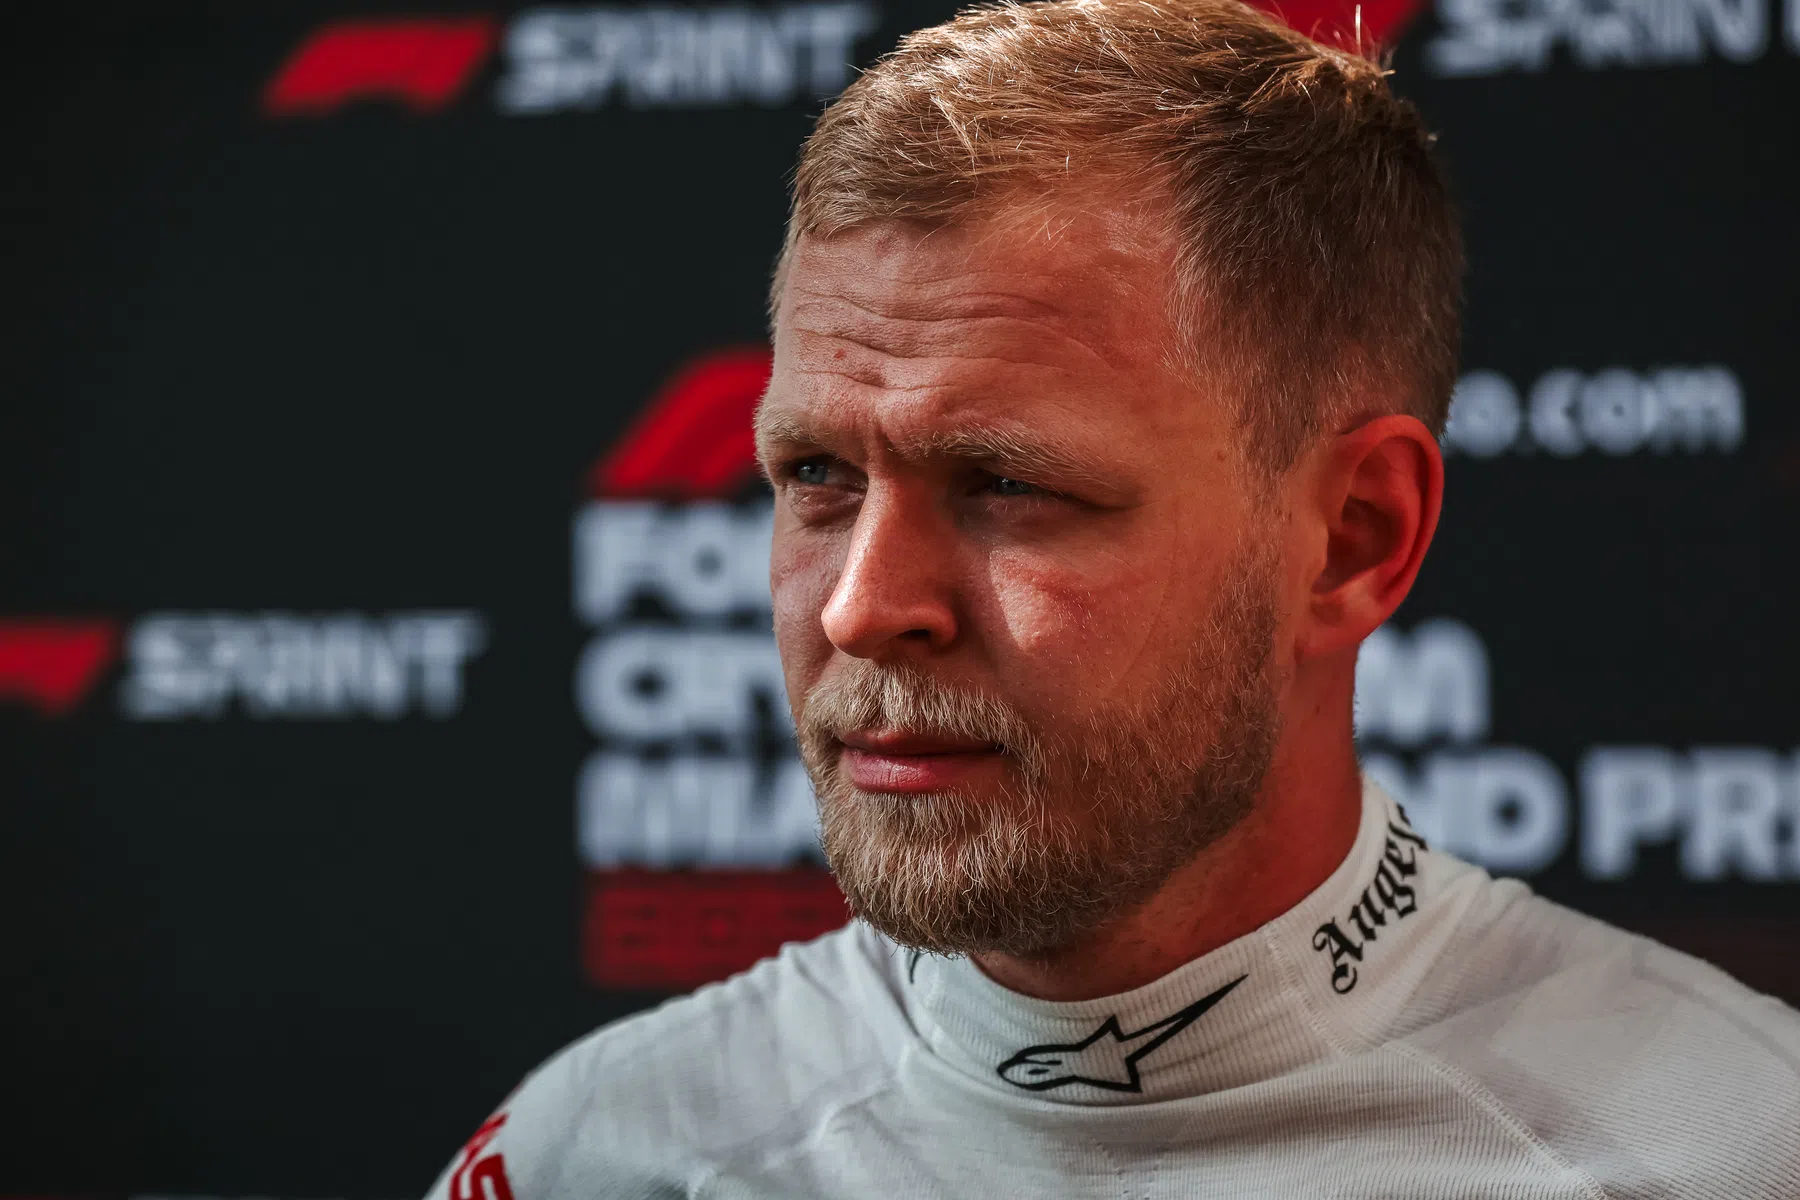 Magnussen heavily criticised after crash with Williams